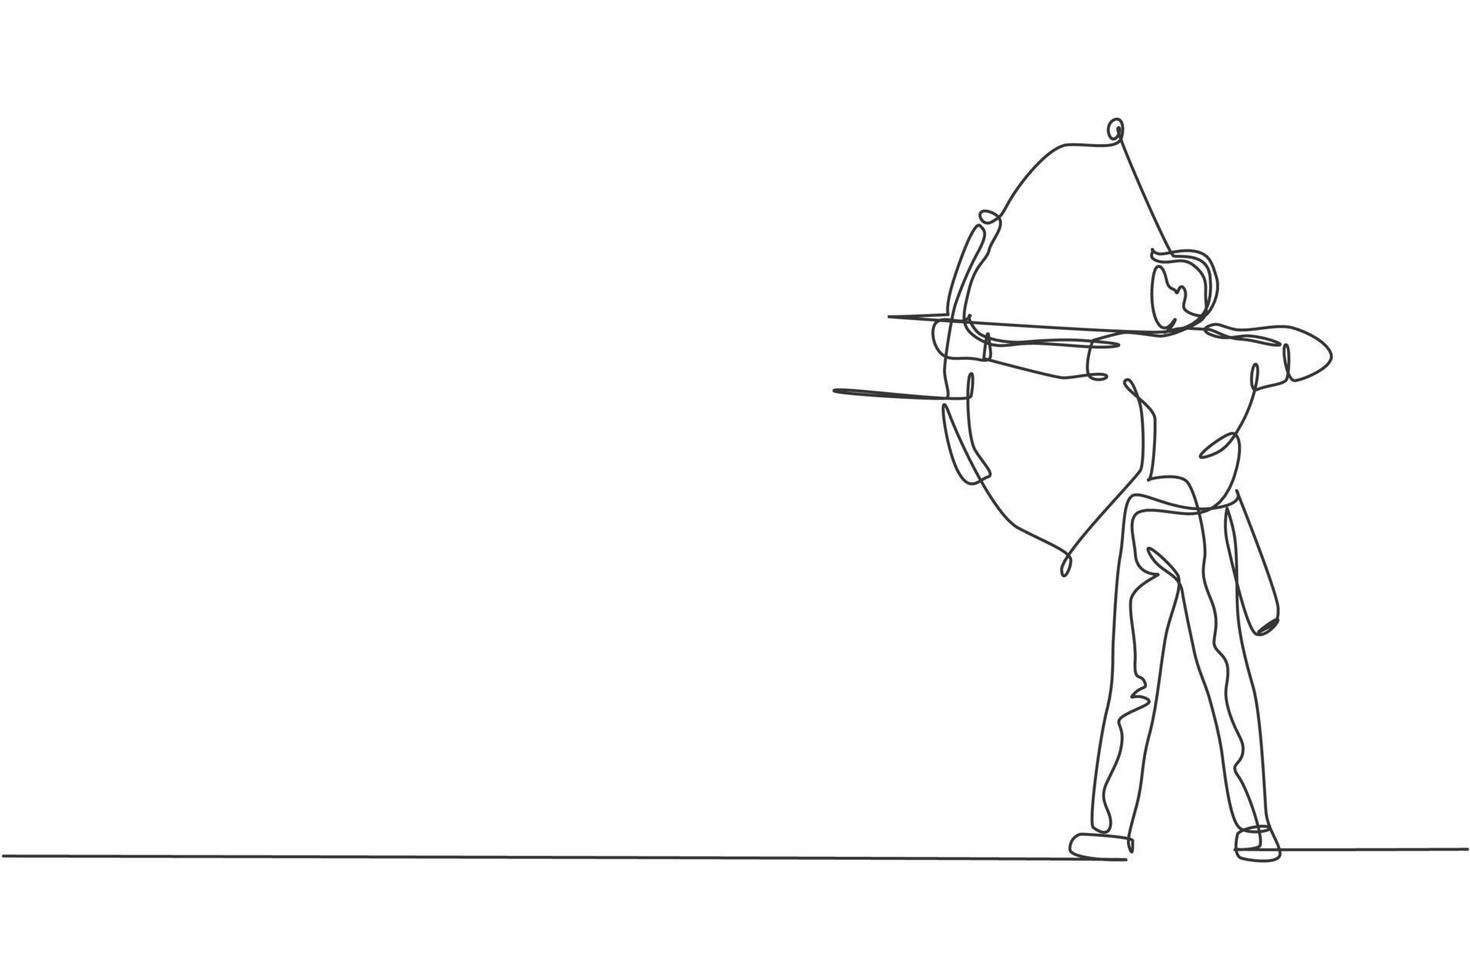 https://static.vecteezy.com/system/resources/previews/007/444/732/non_2x/single-continuous-line-drawing-of-young-professional-archer-man-focus-aiming-archery-target-archery-sport-exercise-with-the-bow-concept-trendy-one-line-draw-design-graphic-illustration-vector.jpg